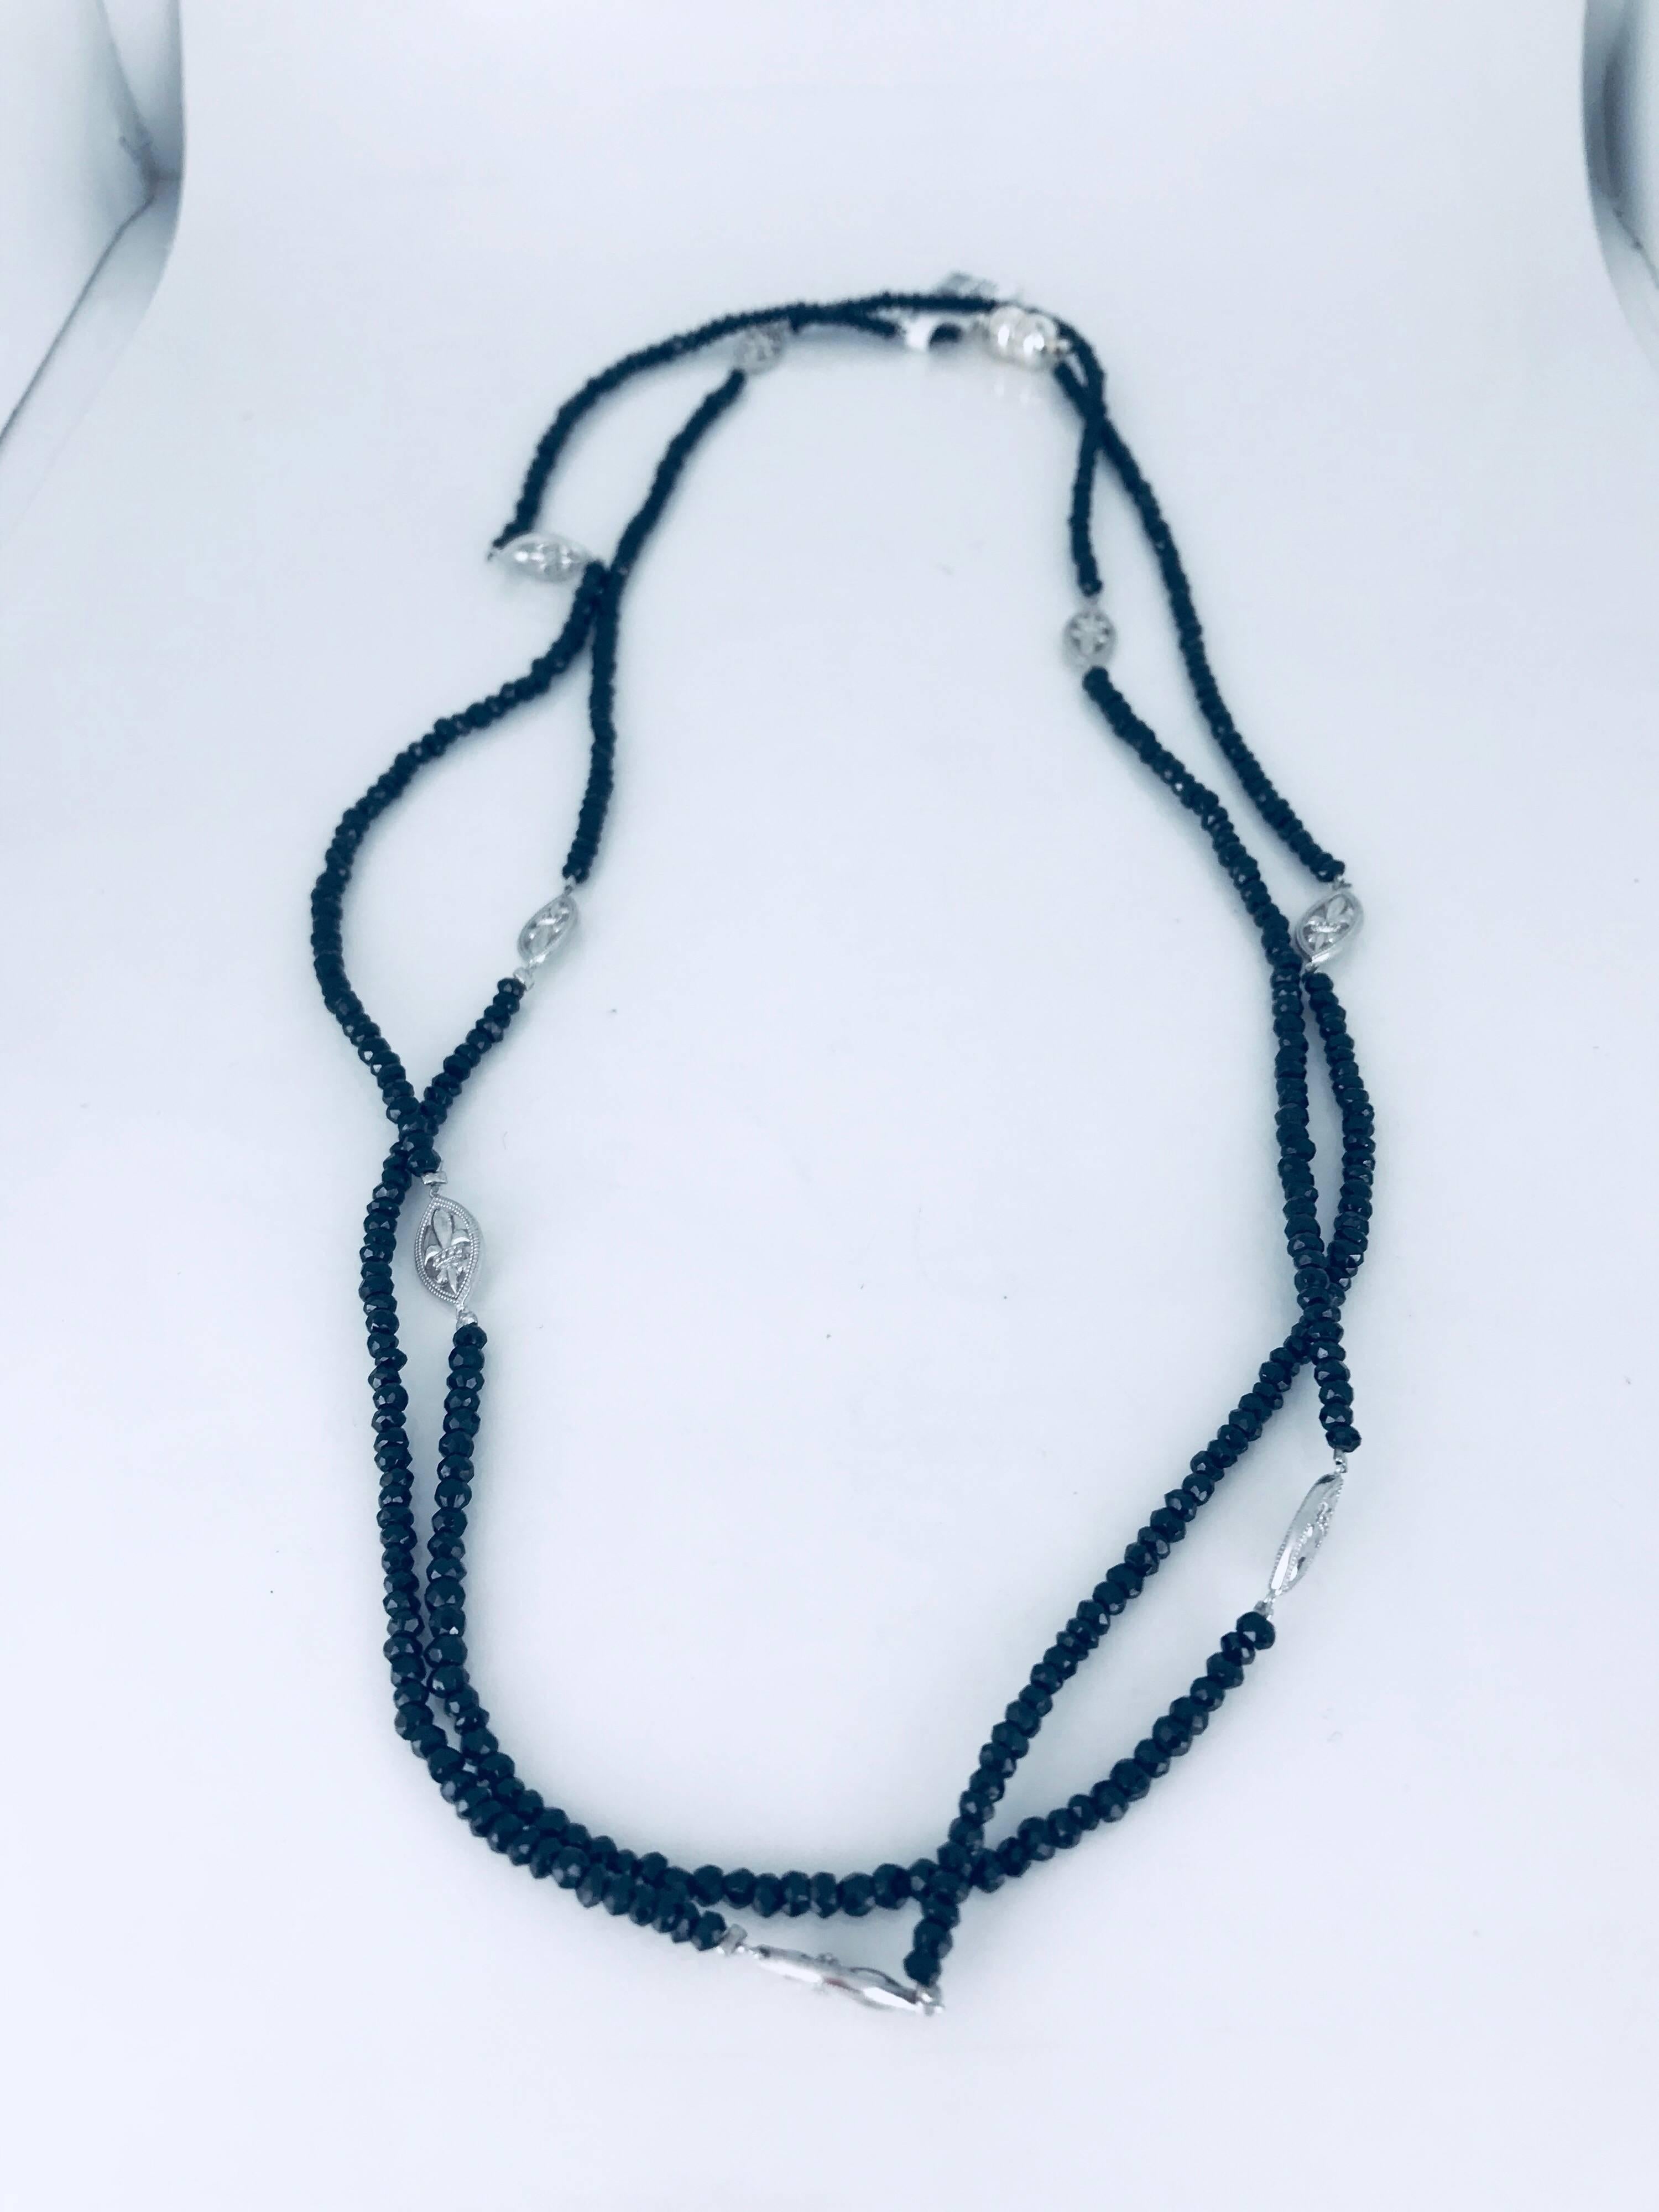 Jude Frances, Fleur De Lis sterling silver, accented necklace with natural beaded black colored, gemstones. The length of the necklace is 47.5 inches with a magnetic clasp. The necklace can be worn a variety of ways, as a choker or opera-length.
The